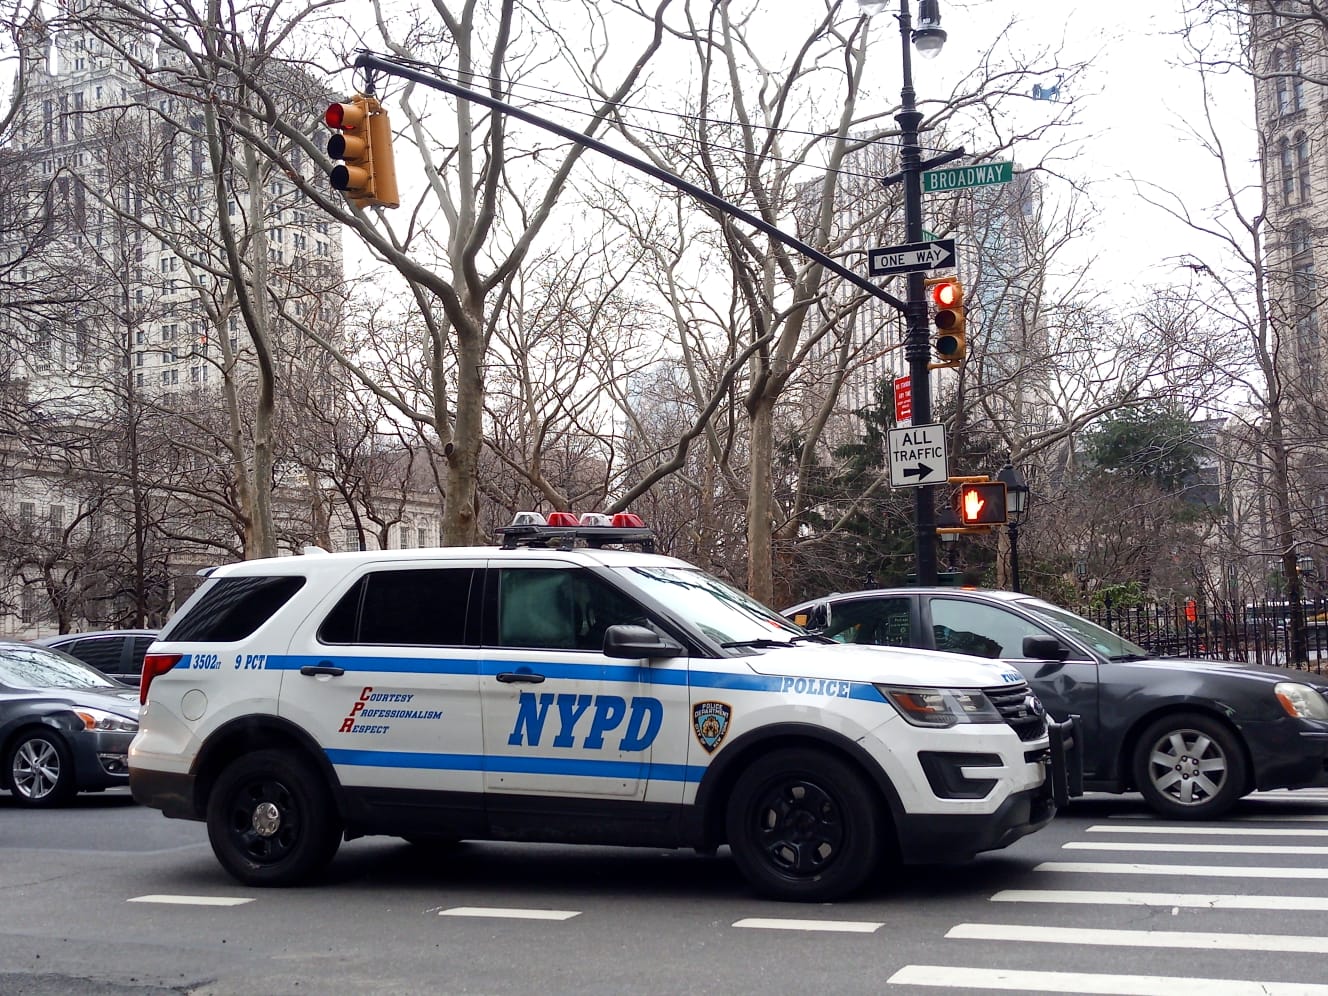 An NYPD car outside of City Hall on Thursday morning